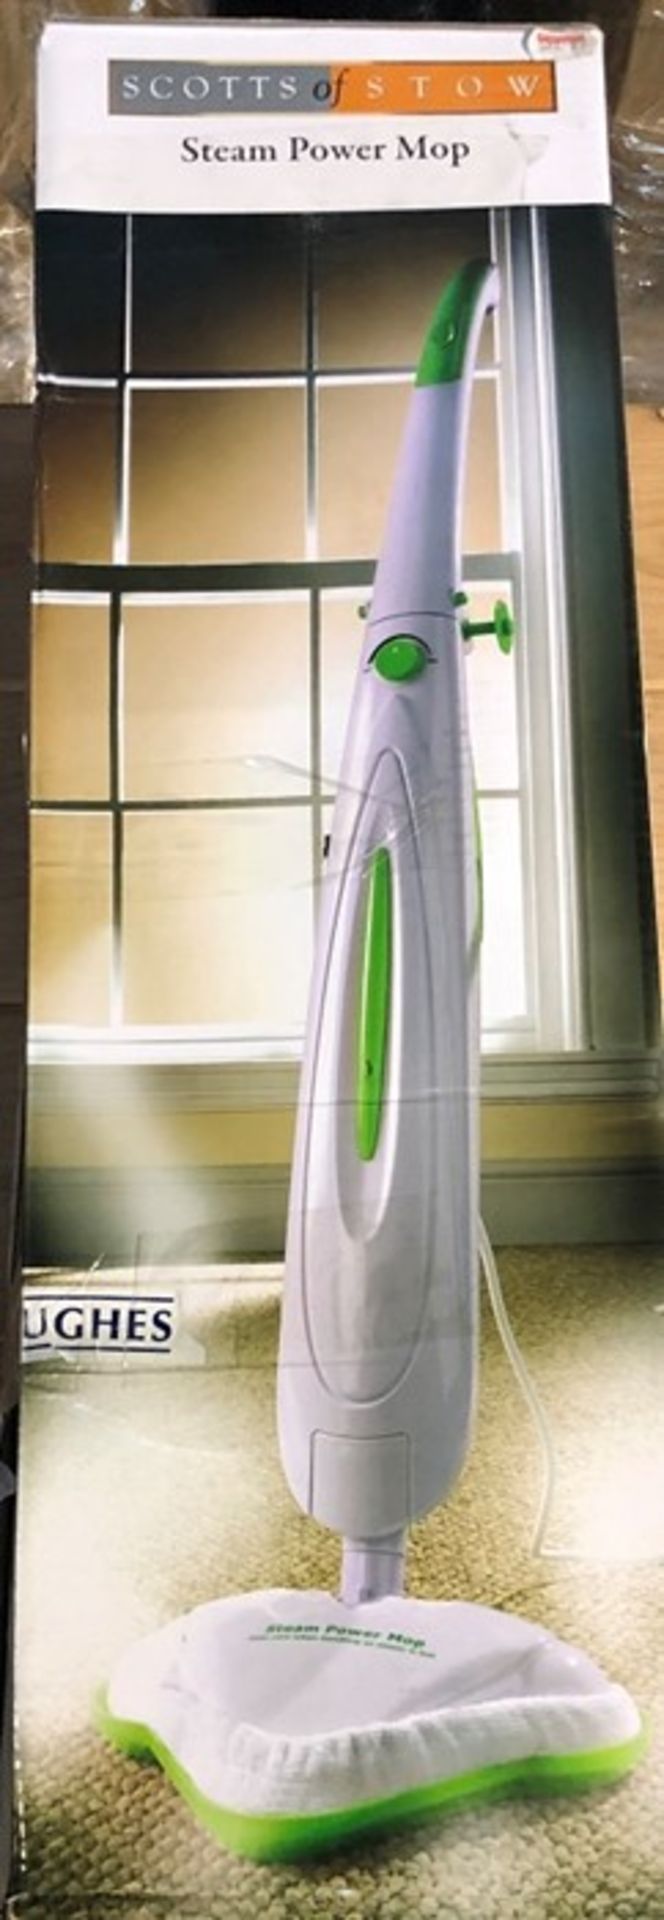 1 BOXED SCOTTS OF STOW STEAM POWER MOP / RRP £34.99 (PUBLIC VIEWING AVAILABLE)